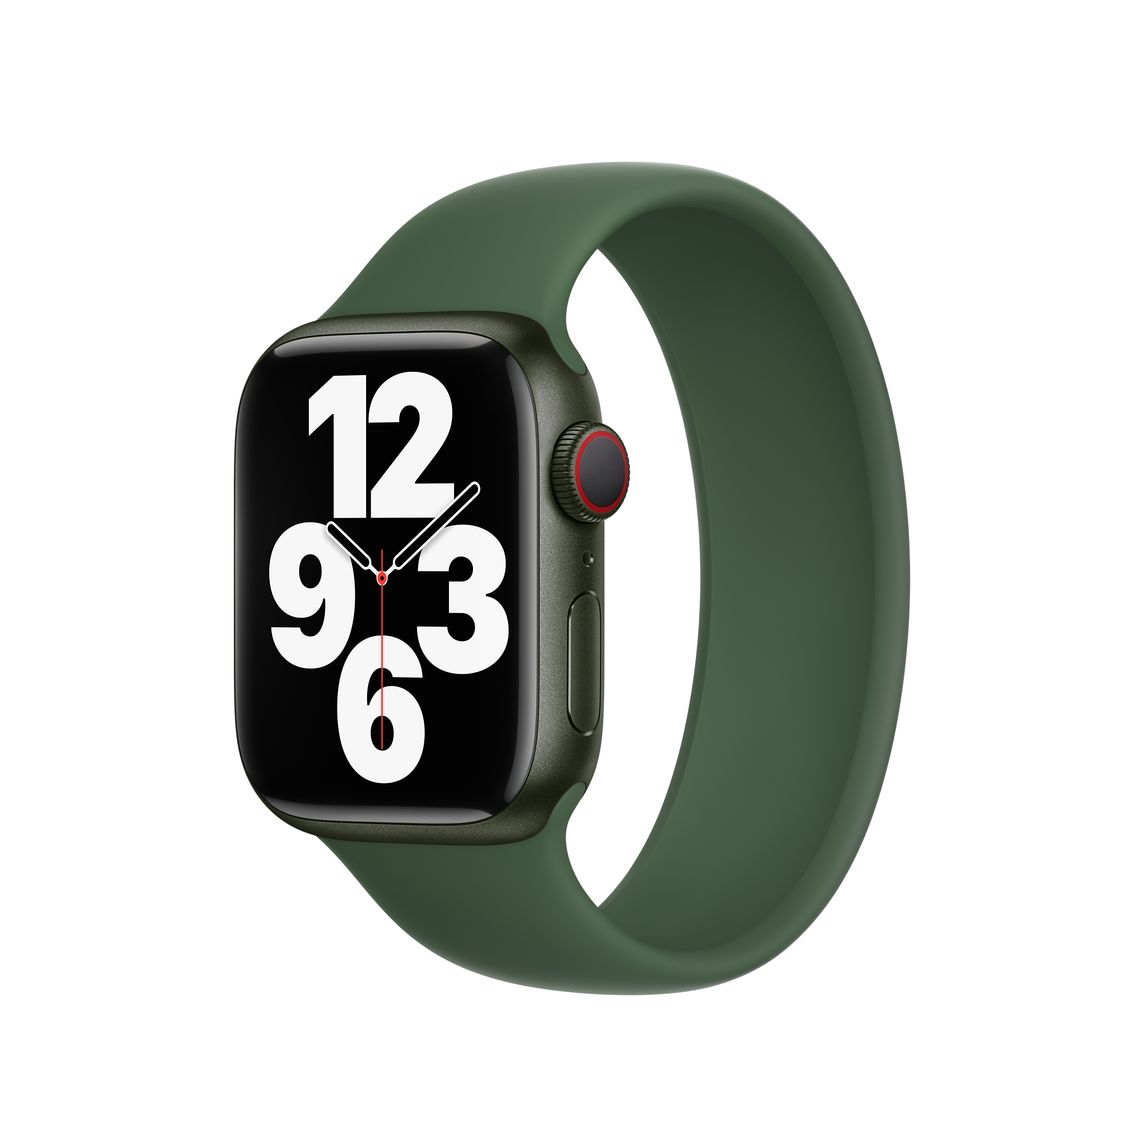 The Clover Solo Loop for Apple Watch comes in nine sizes -- as well as six other Solo Loop colors besides dark green.